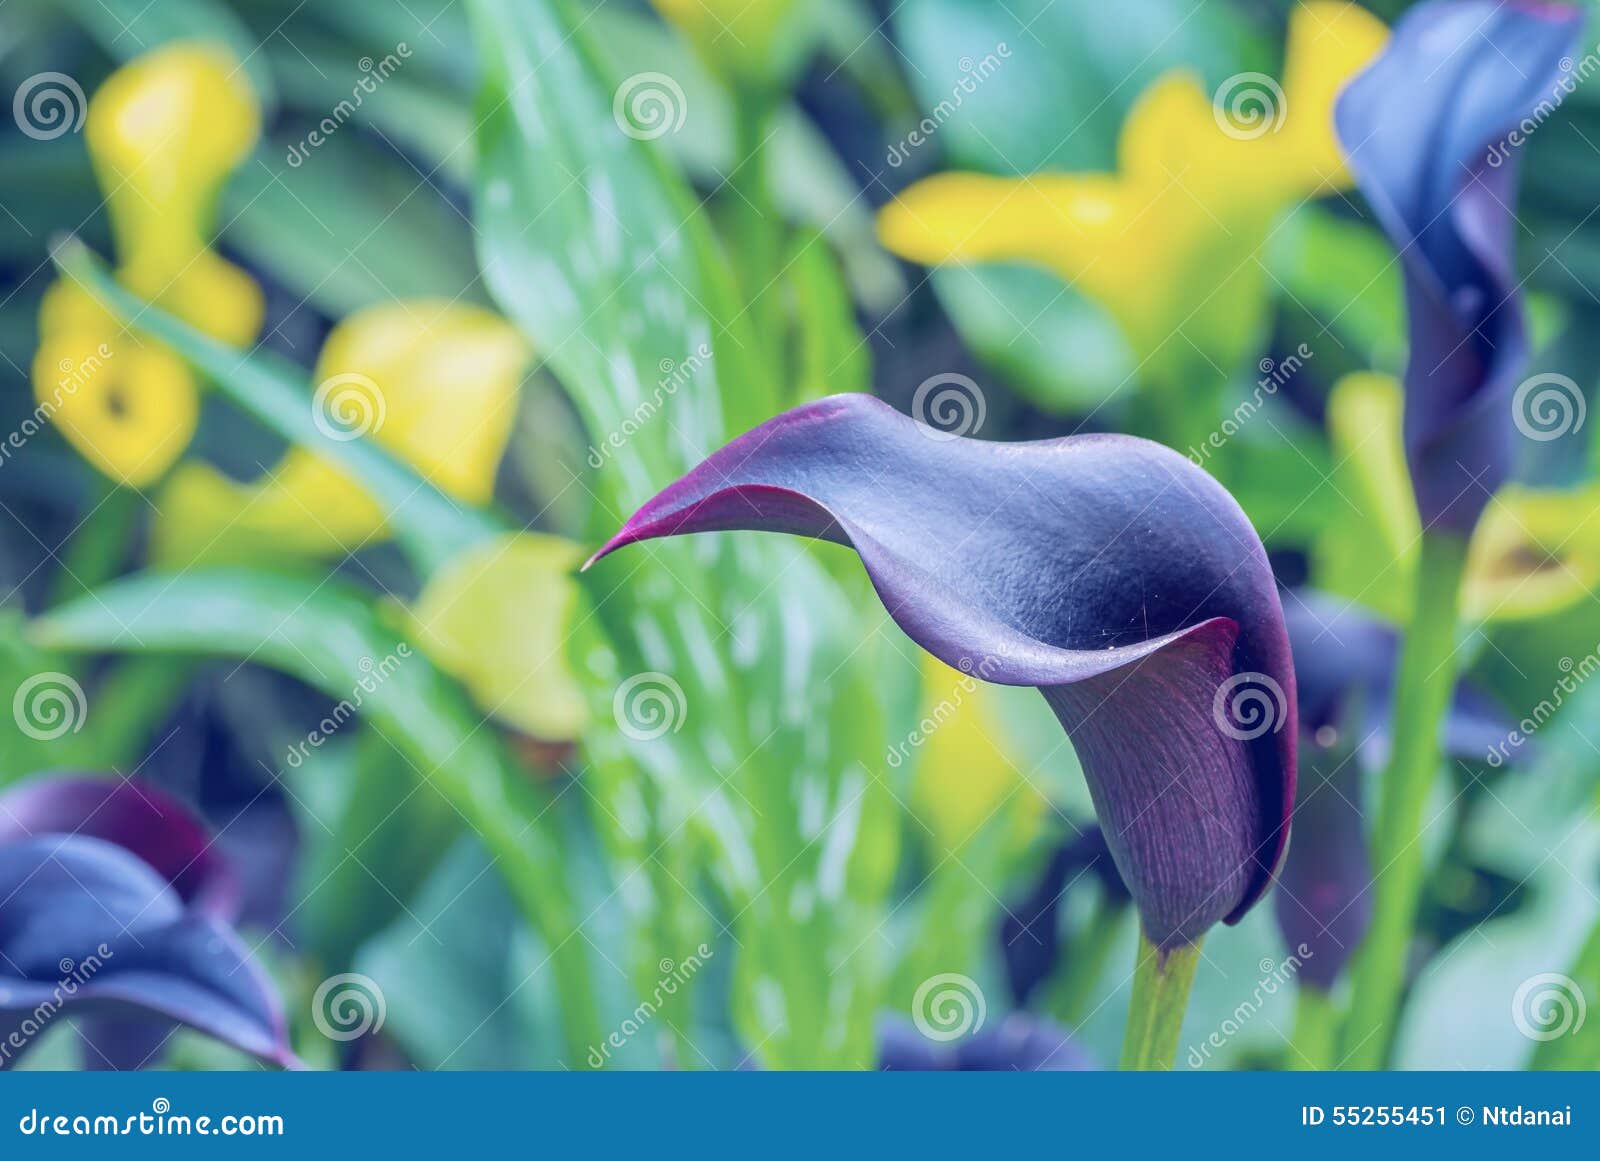 Blue Calla lily stock image. Image of color, violet, purity - 55255451